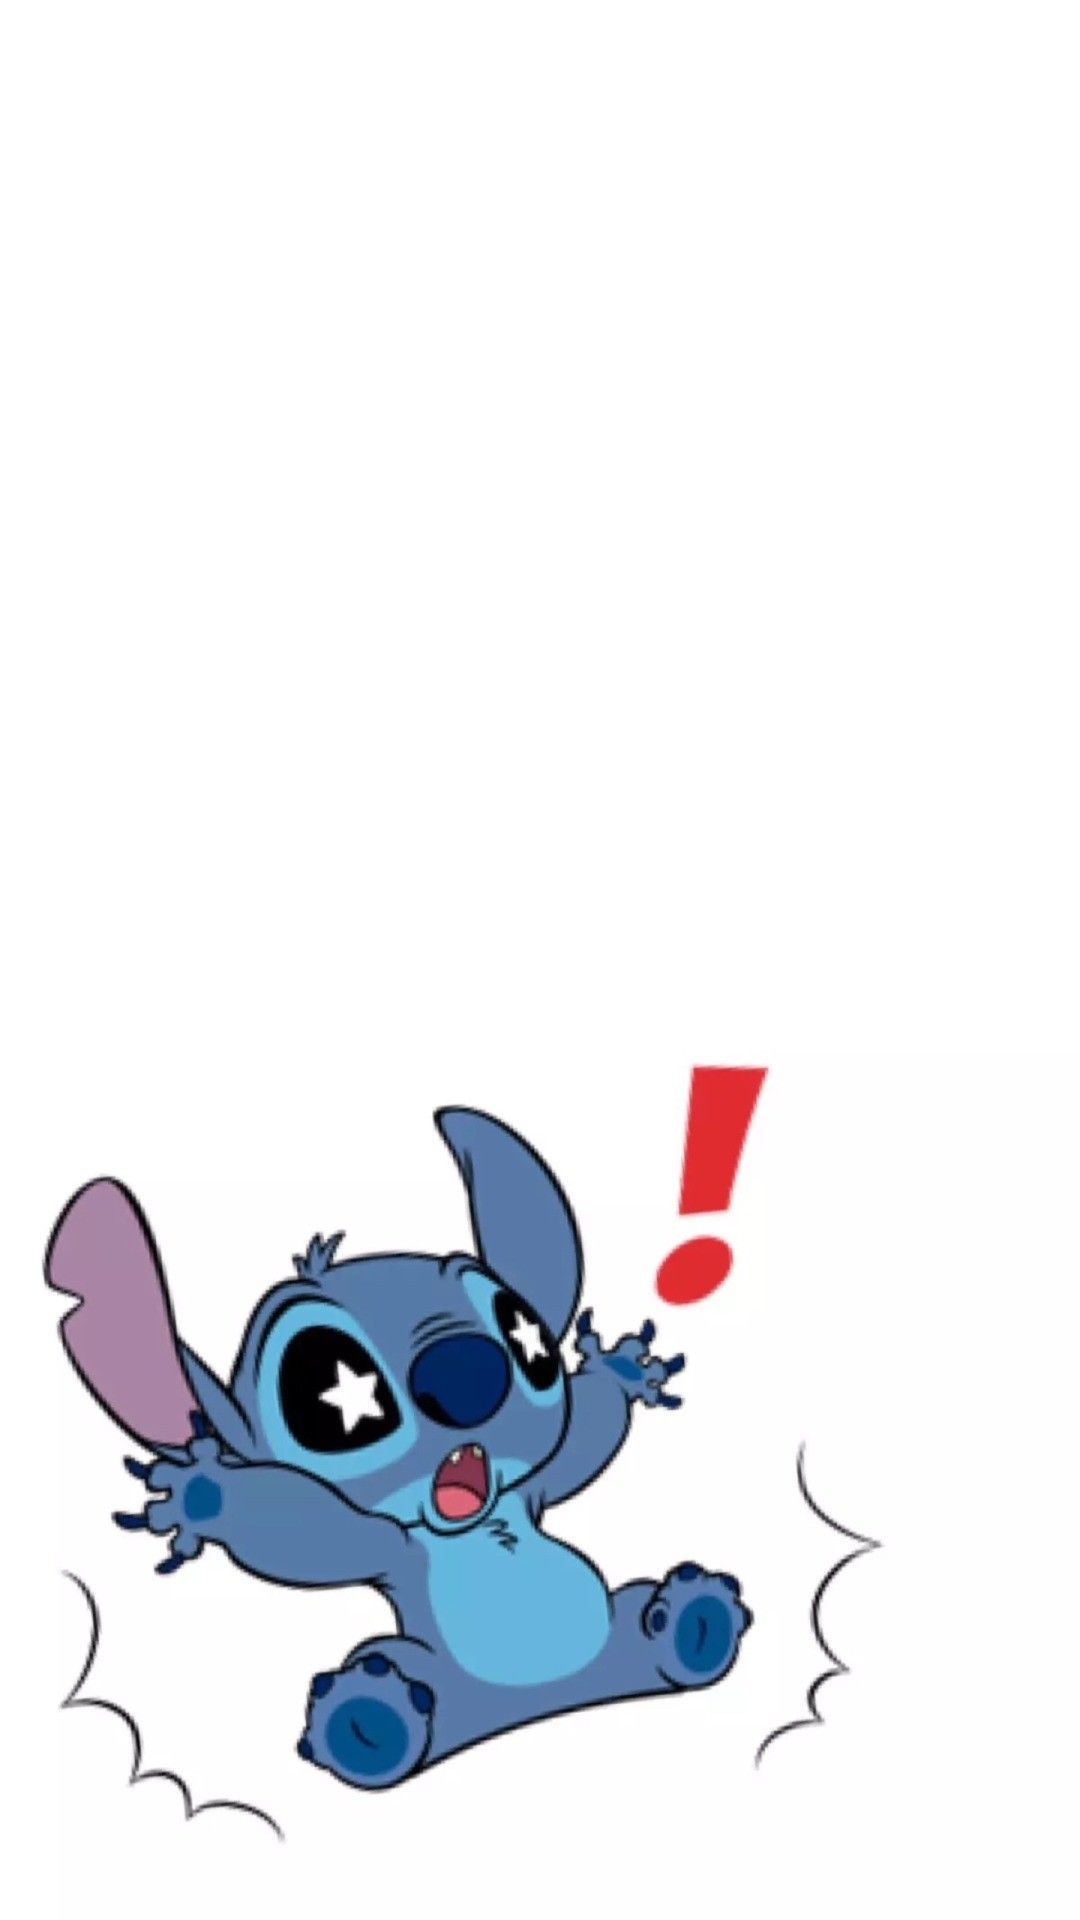 Cute Stitch Wallpapers On Wallpaperdog Disney pumpkin halloween iphone spooky iphone wallpaper lilo draw fall stitch disney nails drawing lol movies gif funny hawaii ohana means family aesthetic sally wallpaper disney movie asthetic alternative. cute stitch wallpapers on wallpaperdog